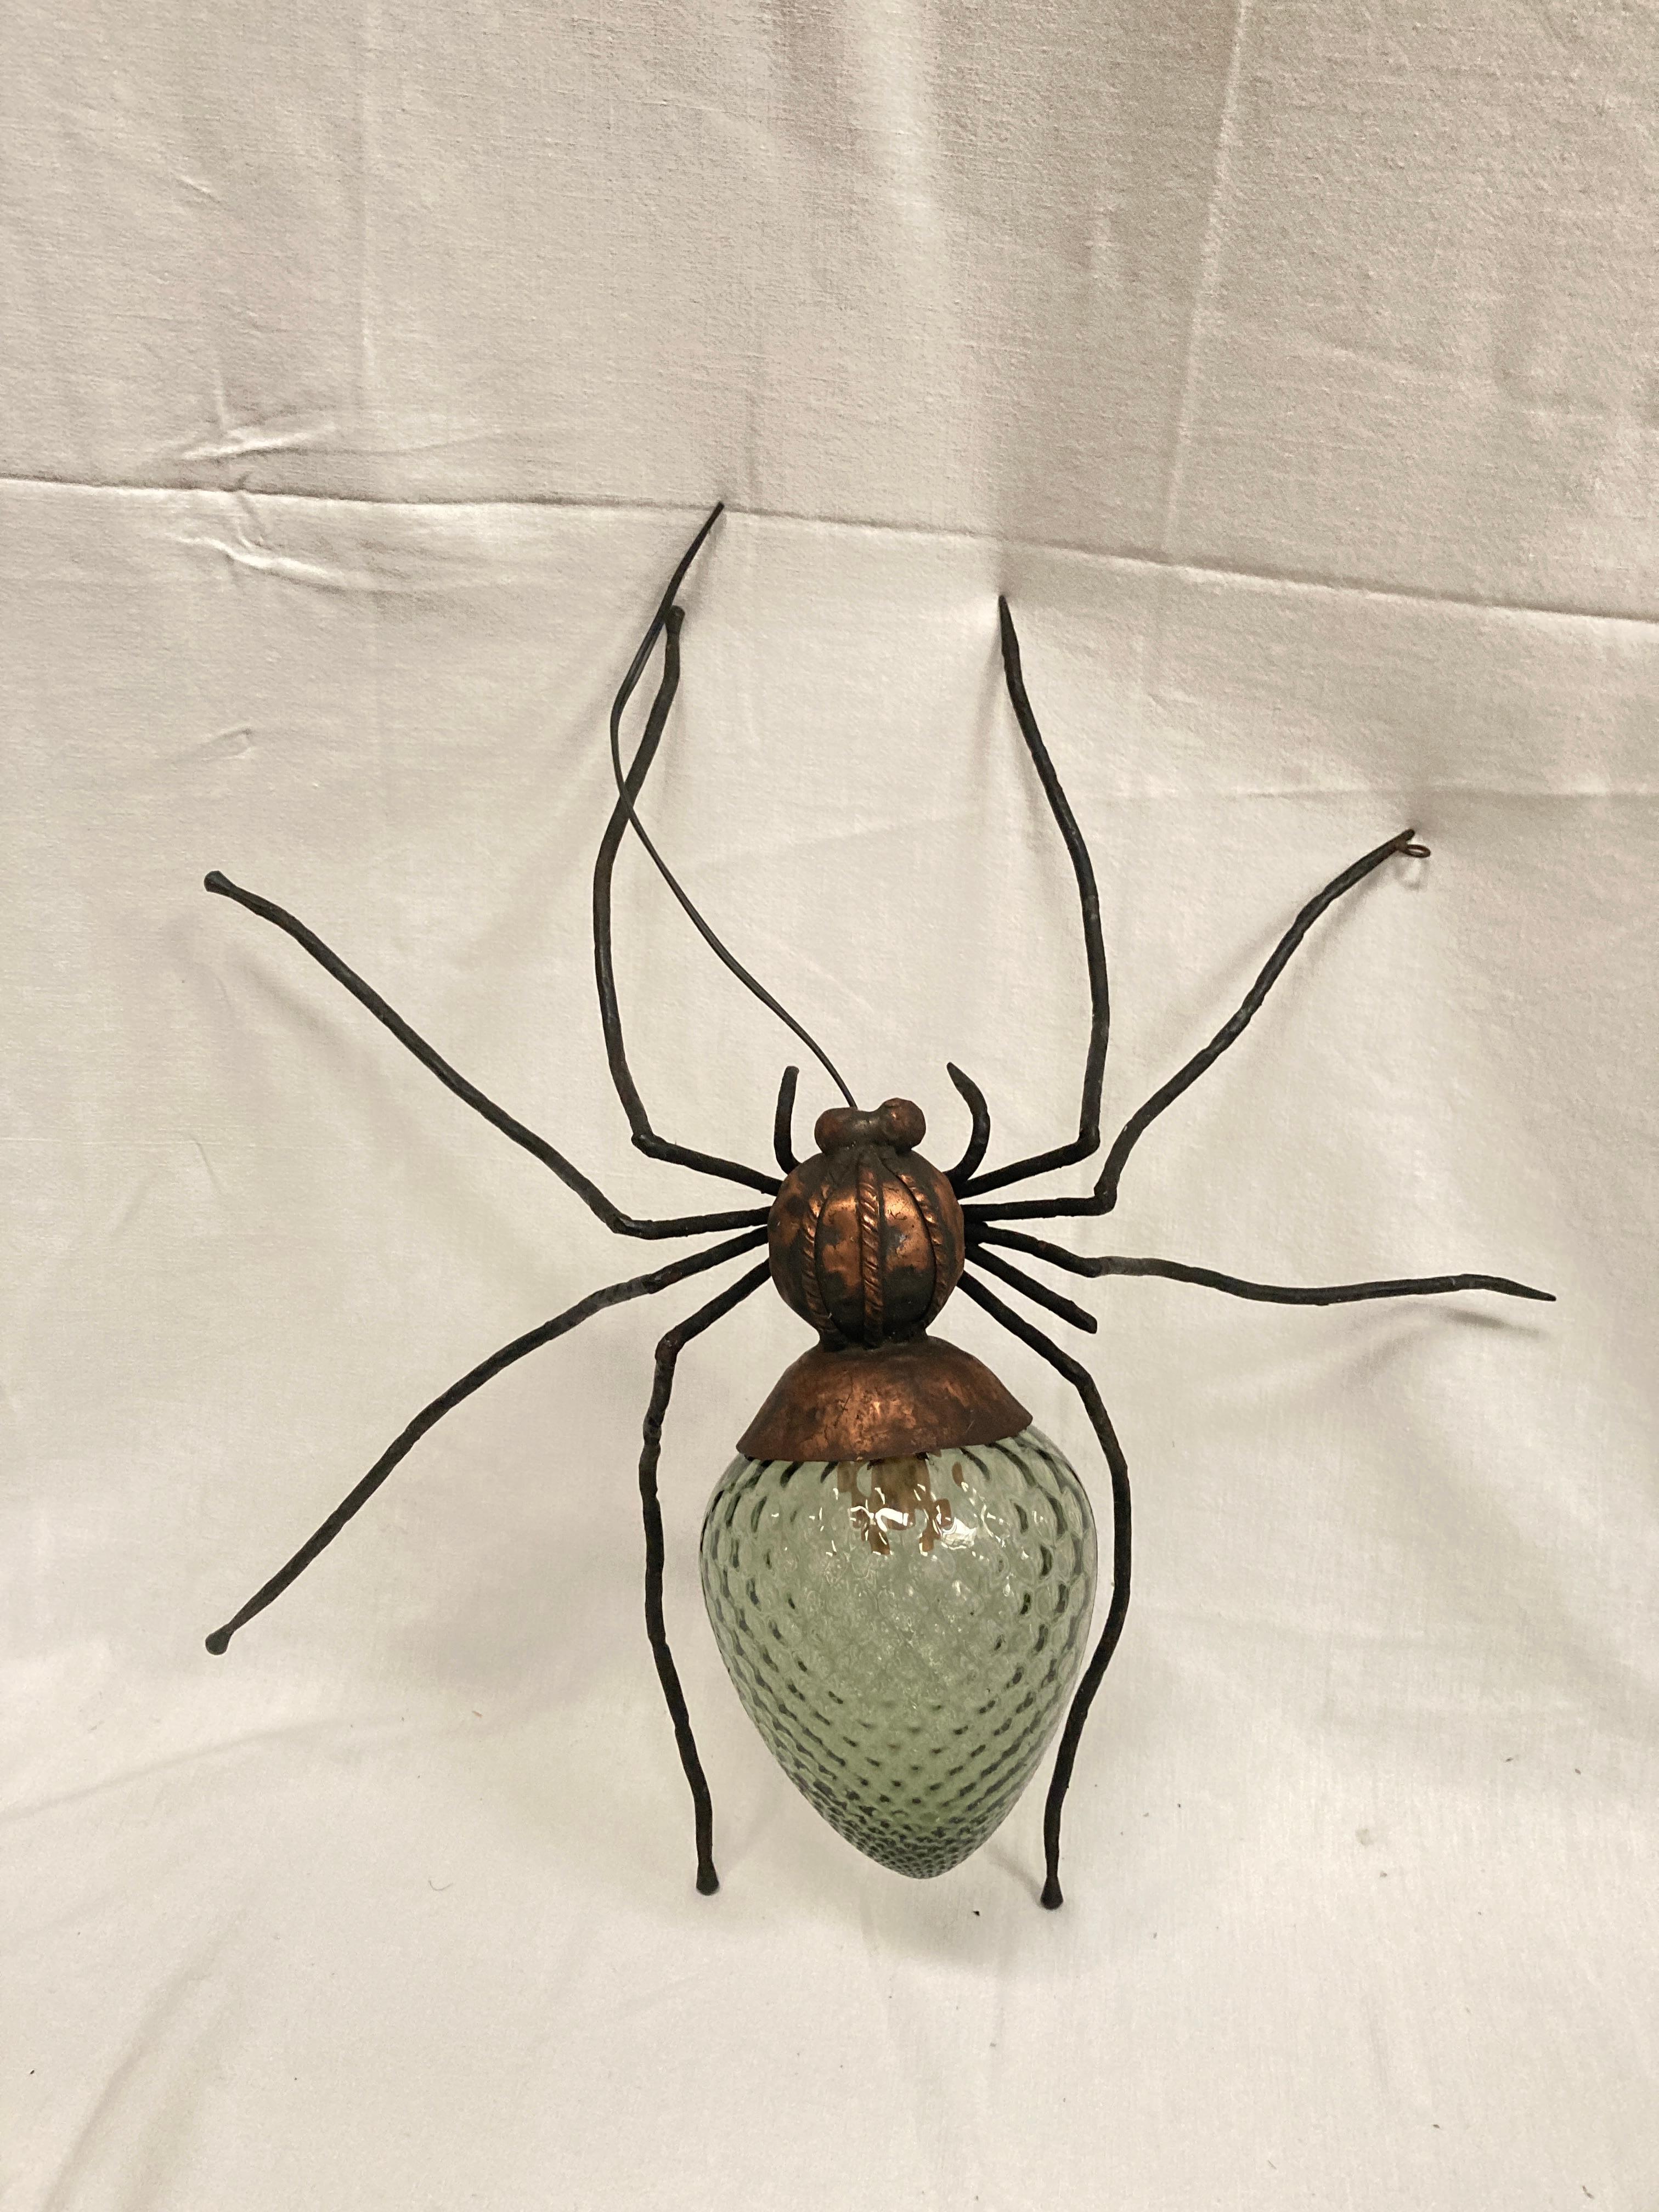 1950's Spider wall light or lamp
Italy